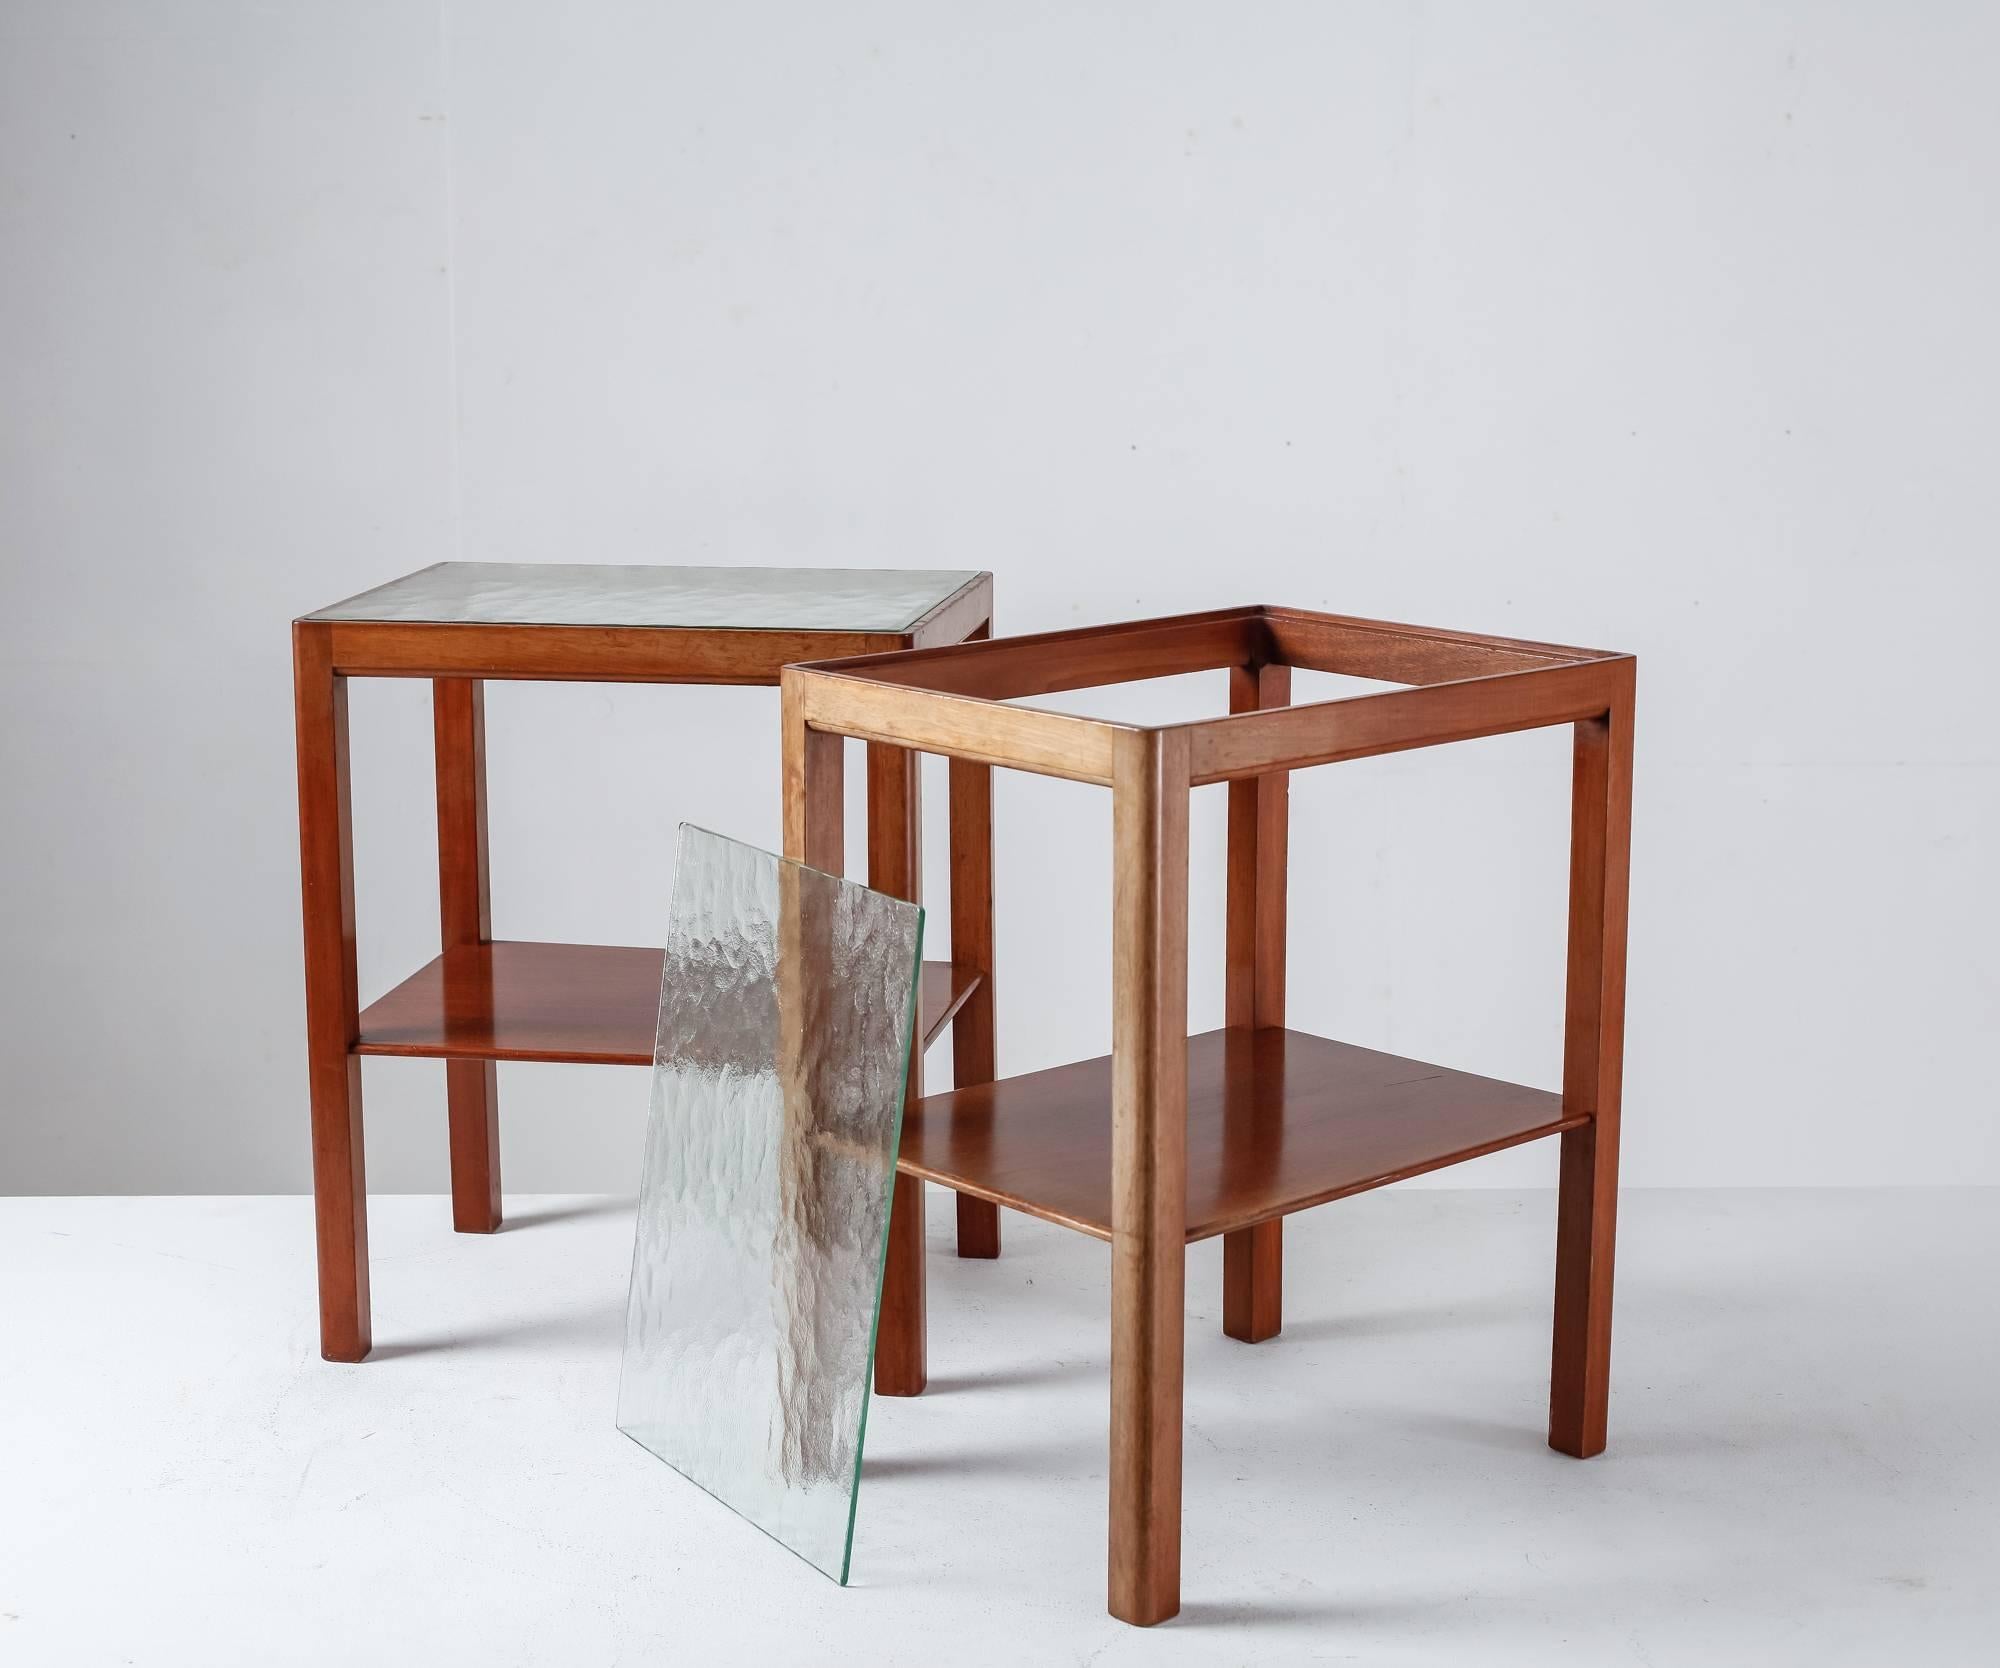 Thorald Madsen Pair of Mahogany Side Tables with Glass Top, Denmark, 1930s In Excellent Condition For Sale In Maastricht, NL